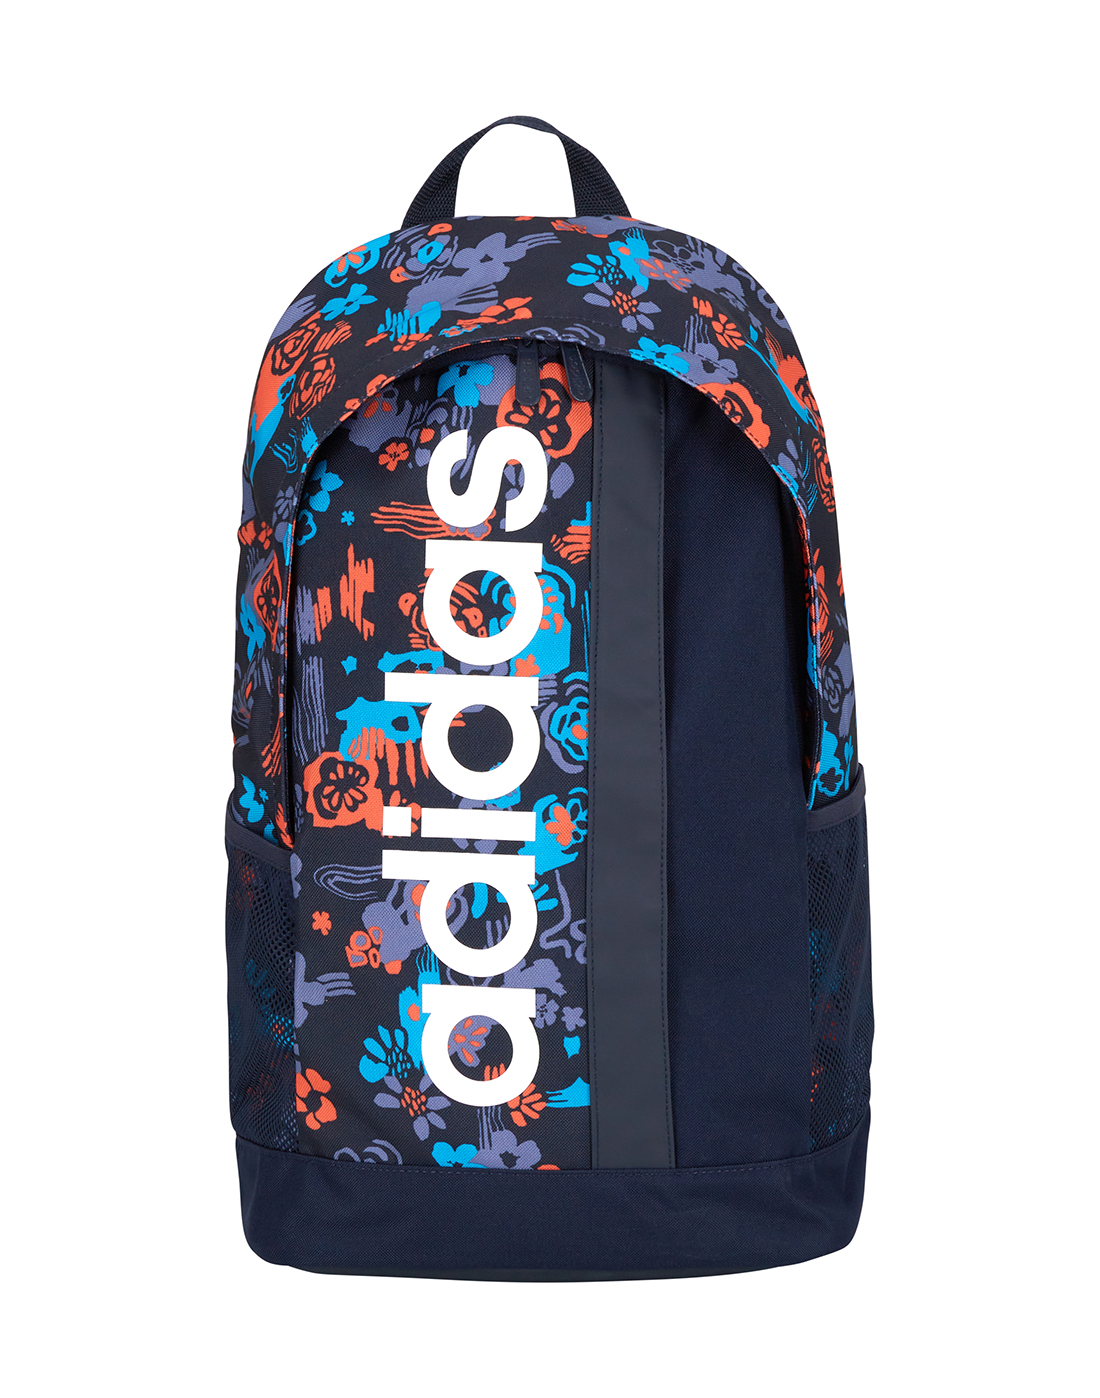 Navy Floral adidas Backpack | Life Style Sports